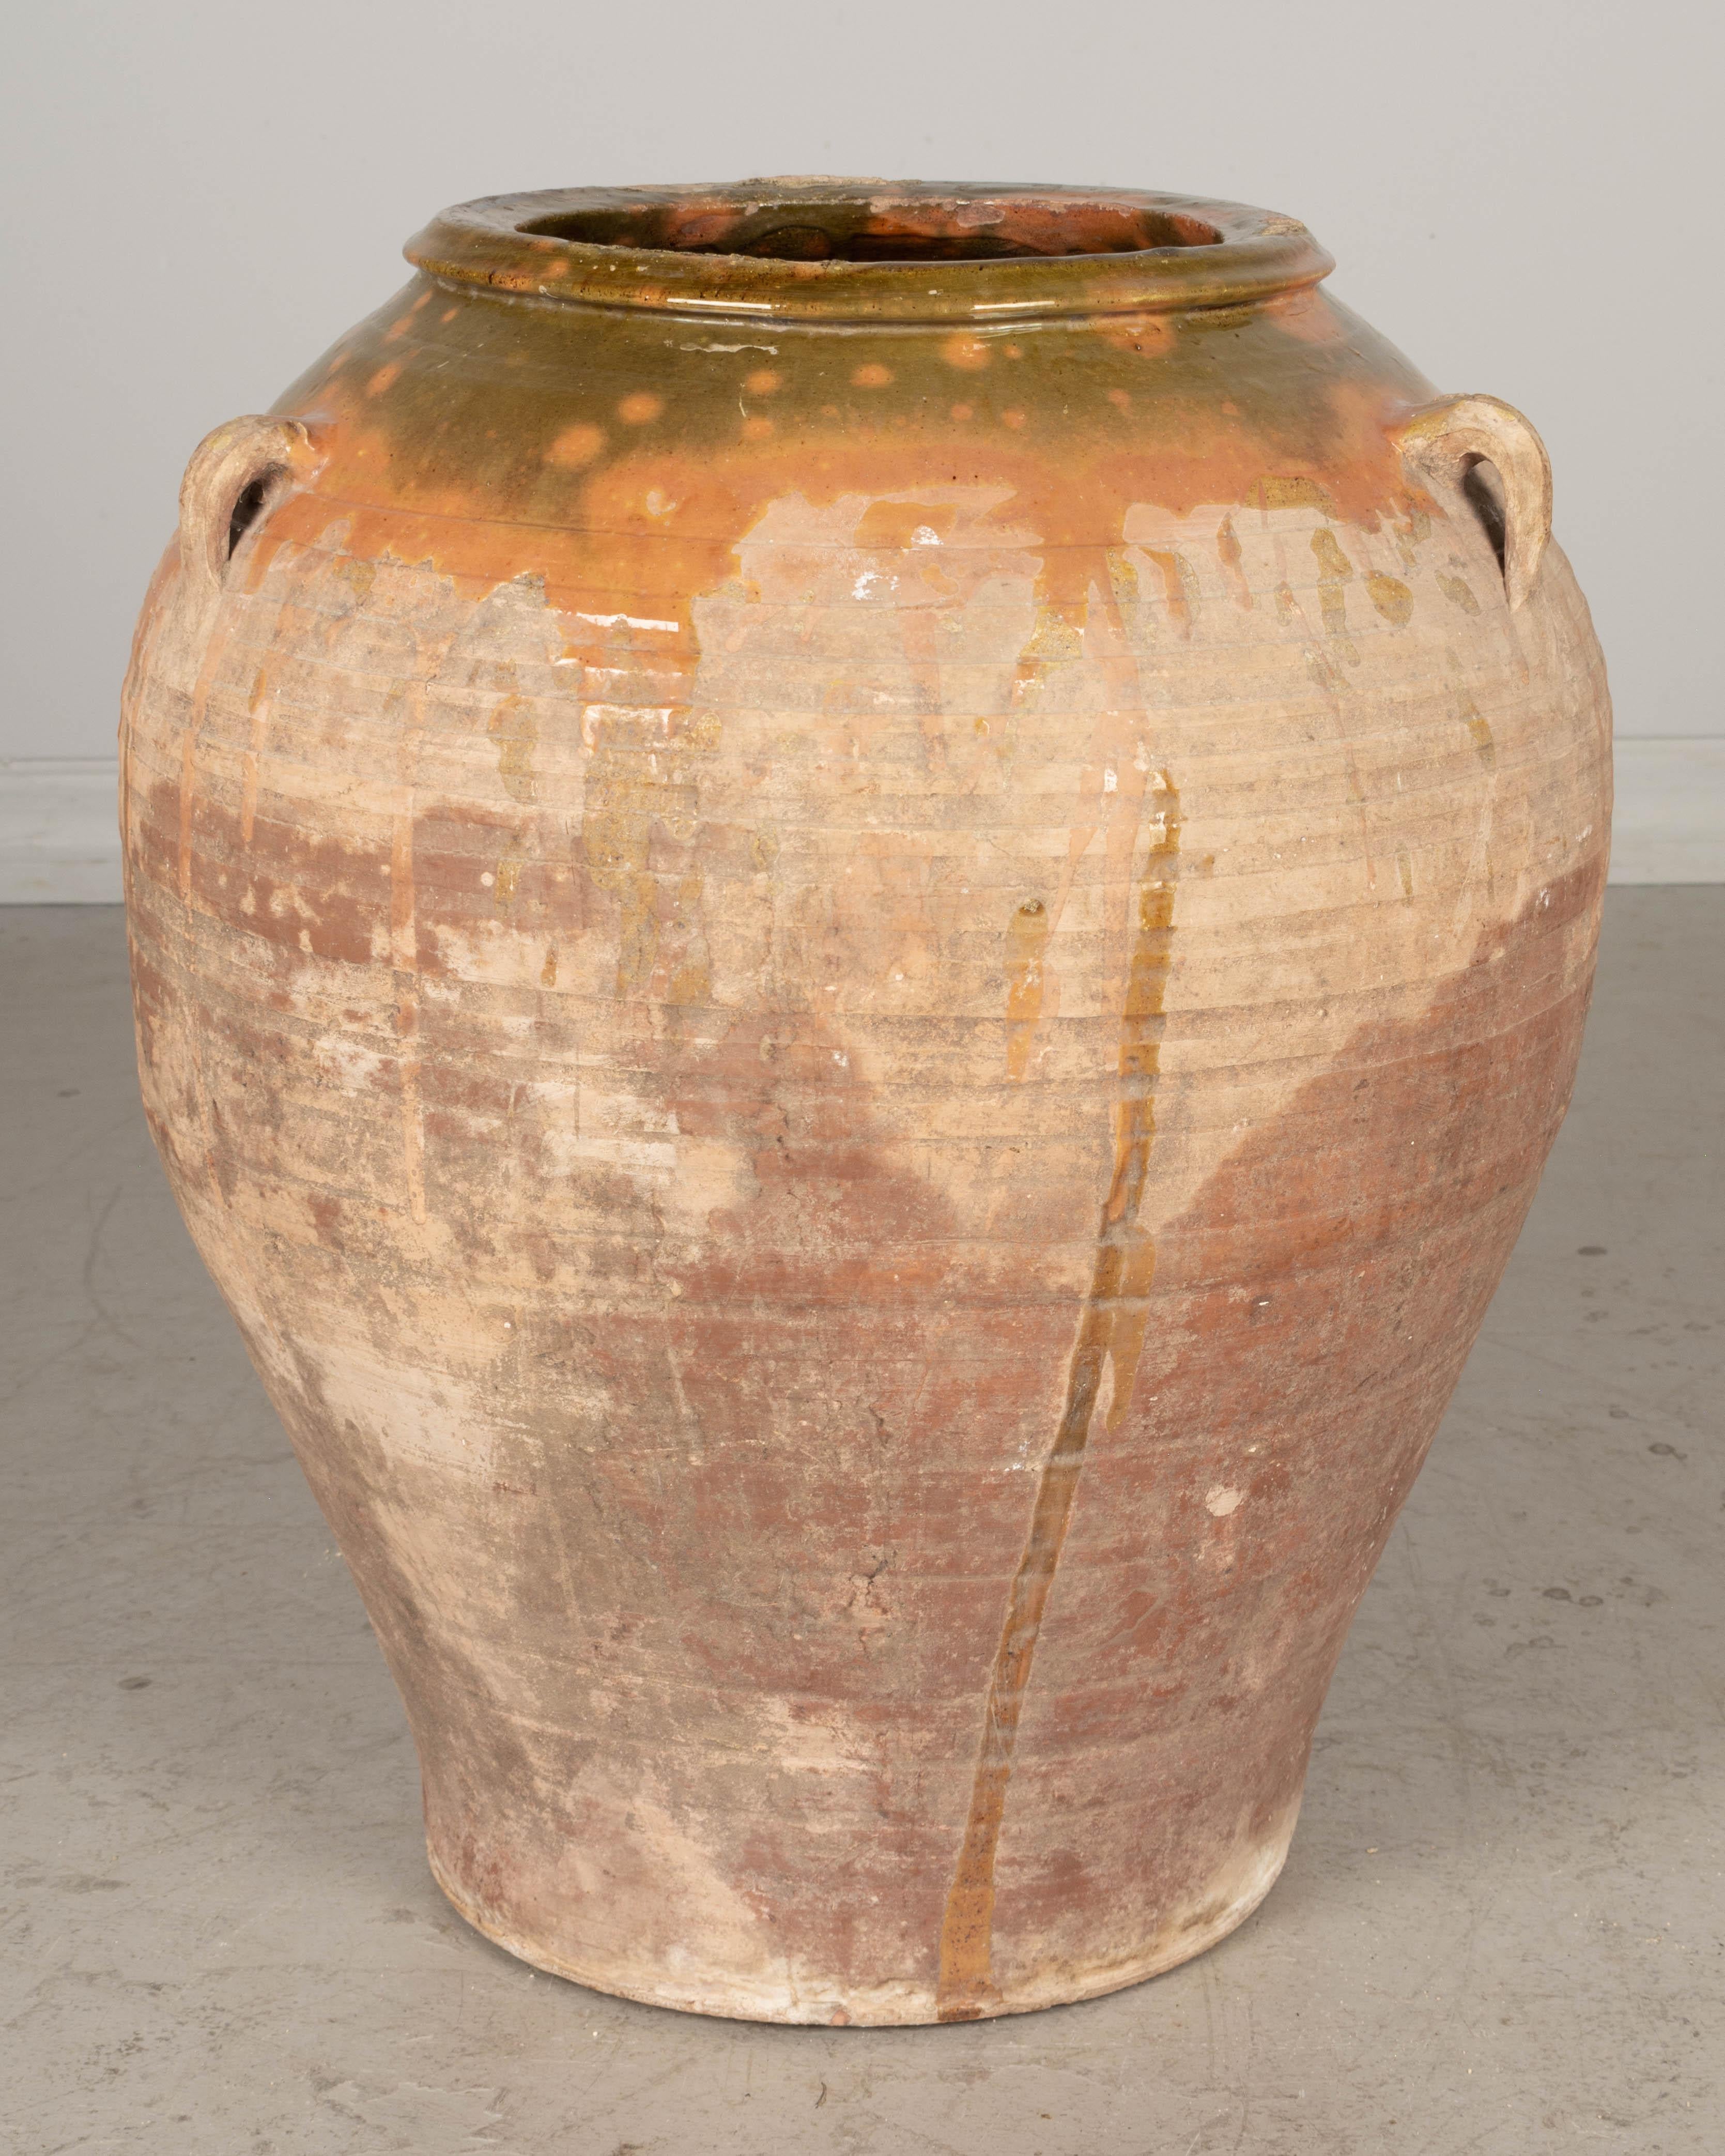 A large 19th century Spanish terracotta olive jar with orange and green glaze at the rim dripping down the sides. Beautiful warm weathered patina. One of the small handles has broken off. Minor losses. Nice as a decorative piece for use indoors or